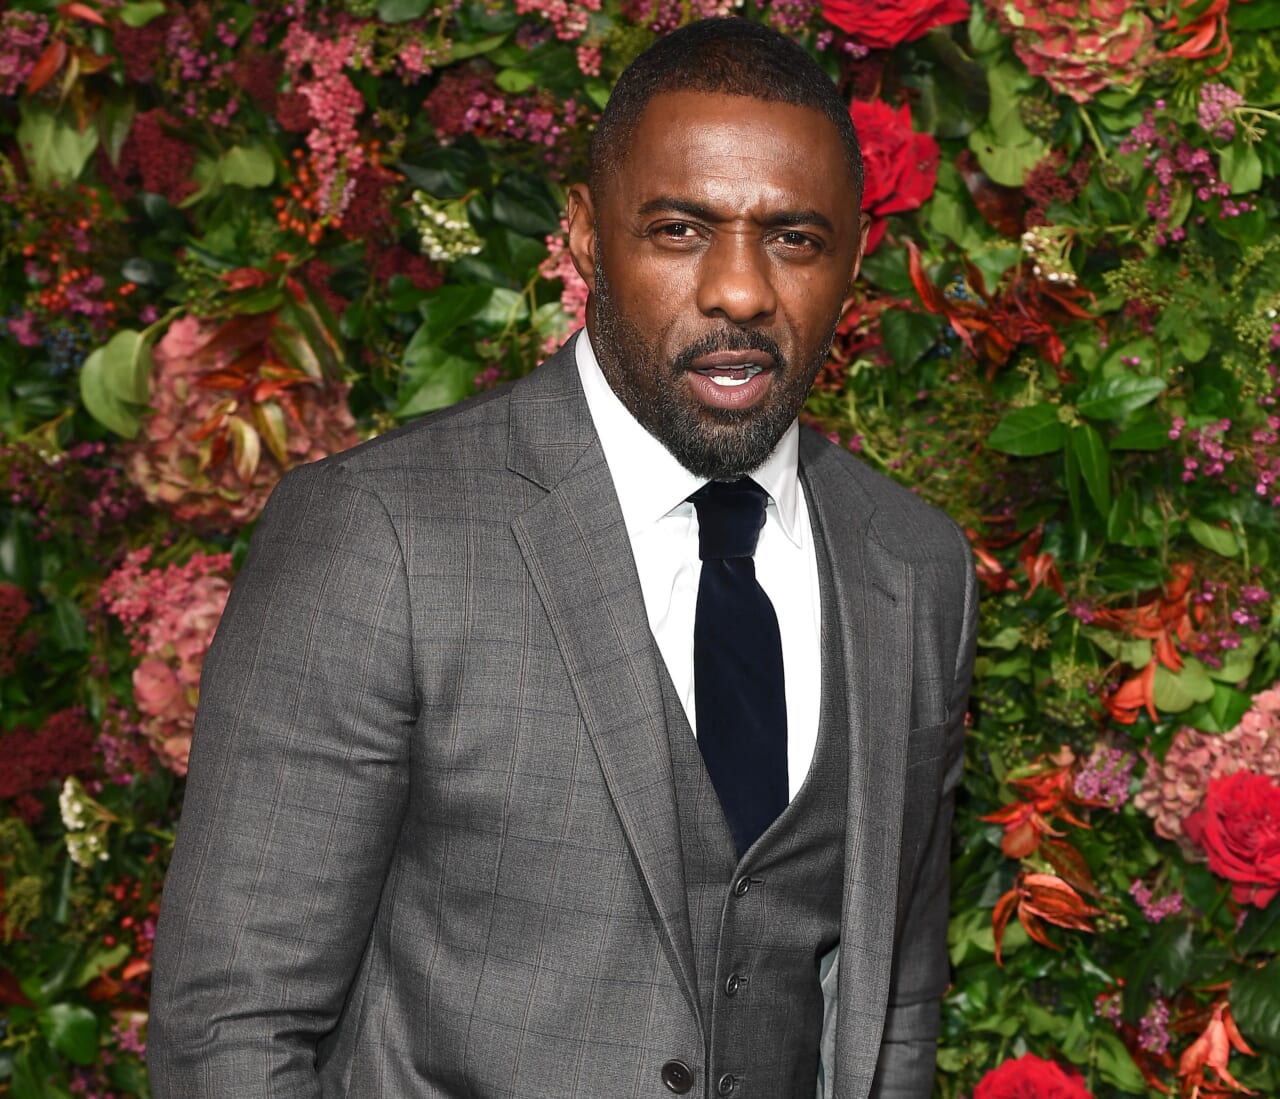 Idris Elba to host ‘Saturday Night Live’ for the first time